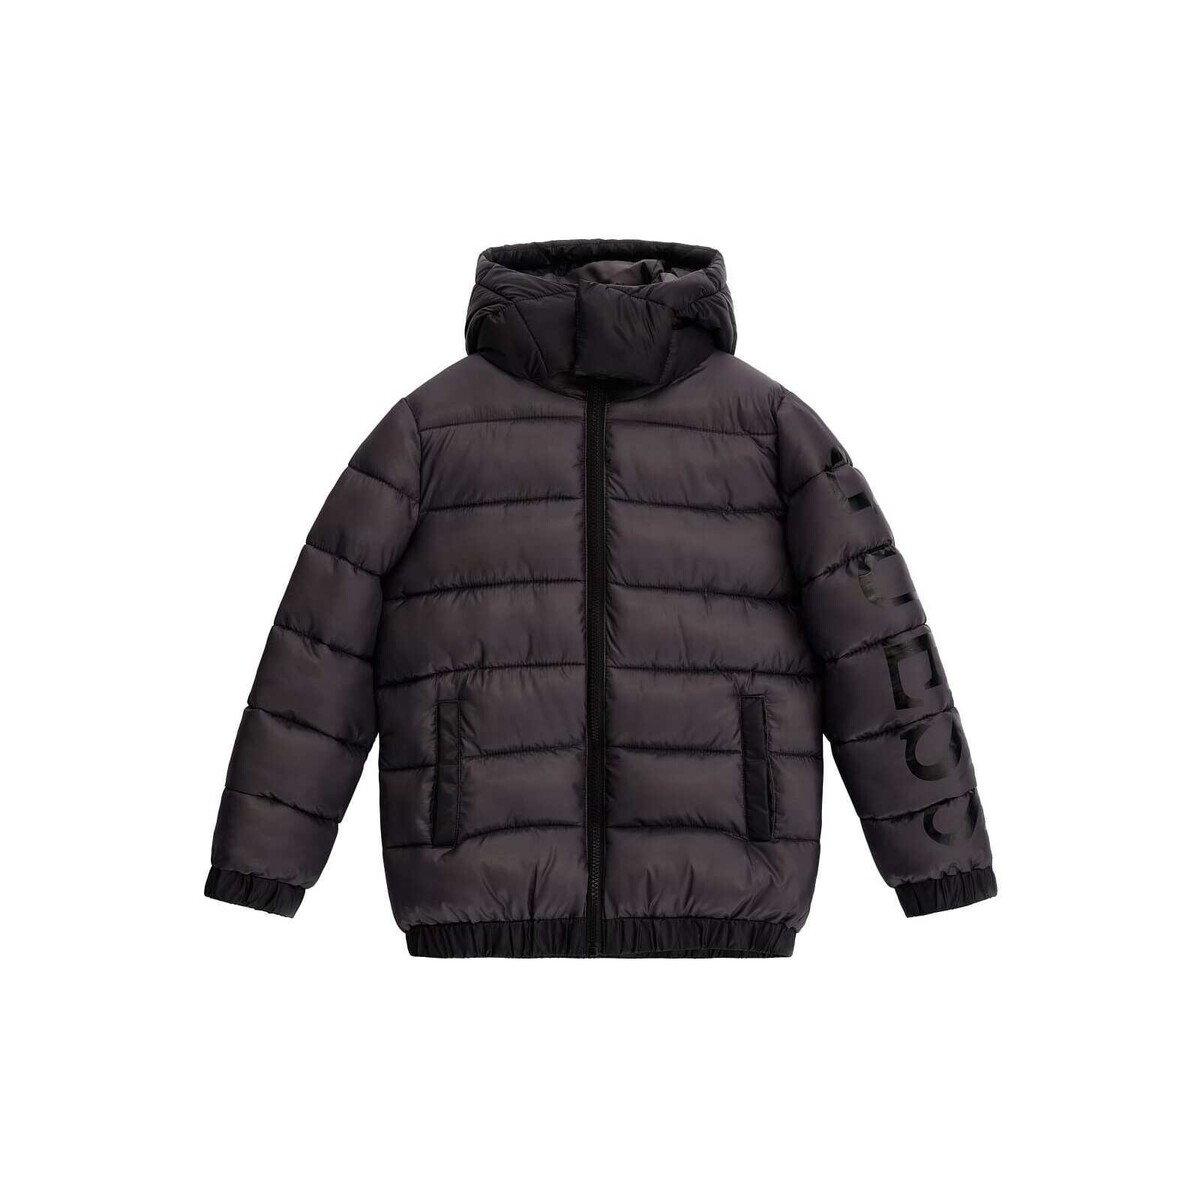 Grey Guess - Duffel Clothing ! Child Free - Spartoo coats | delivery L3BL10 NET